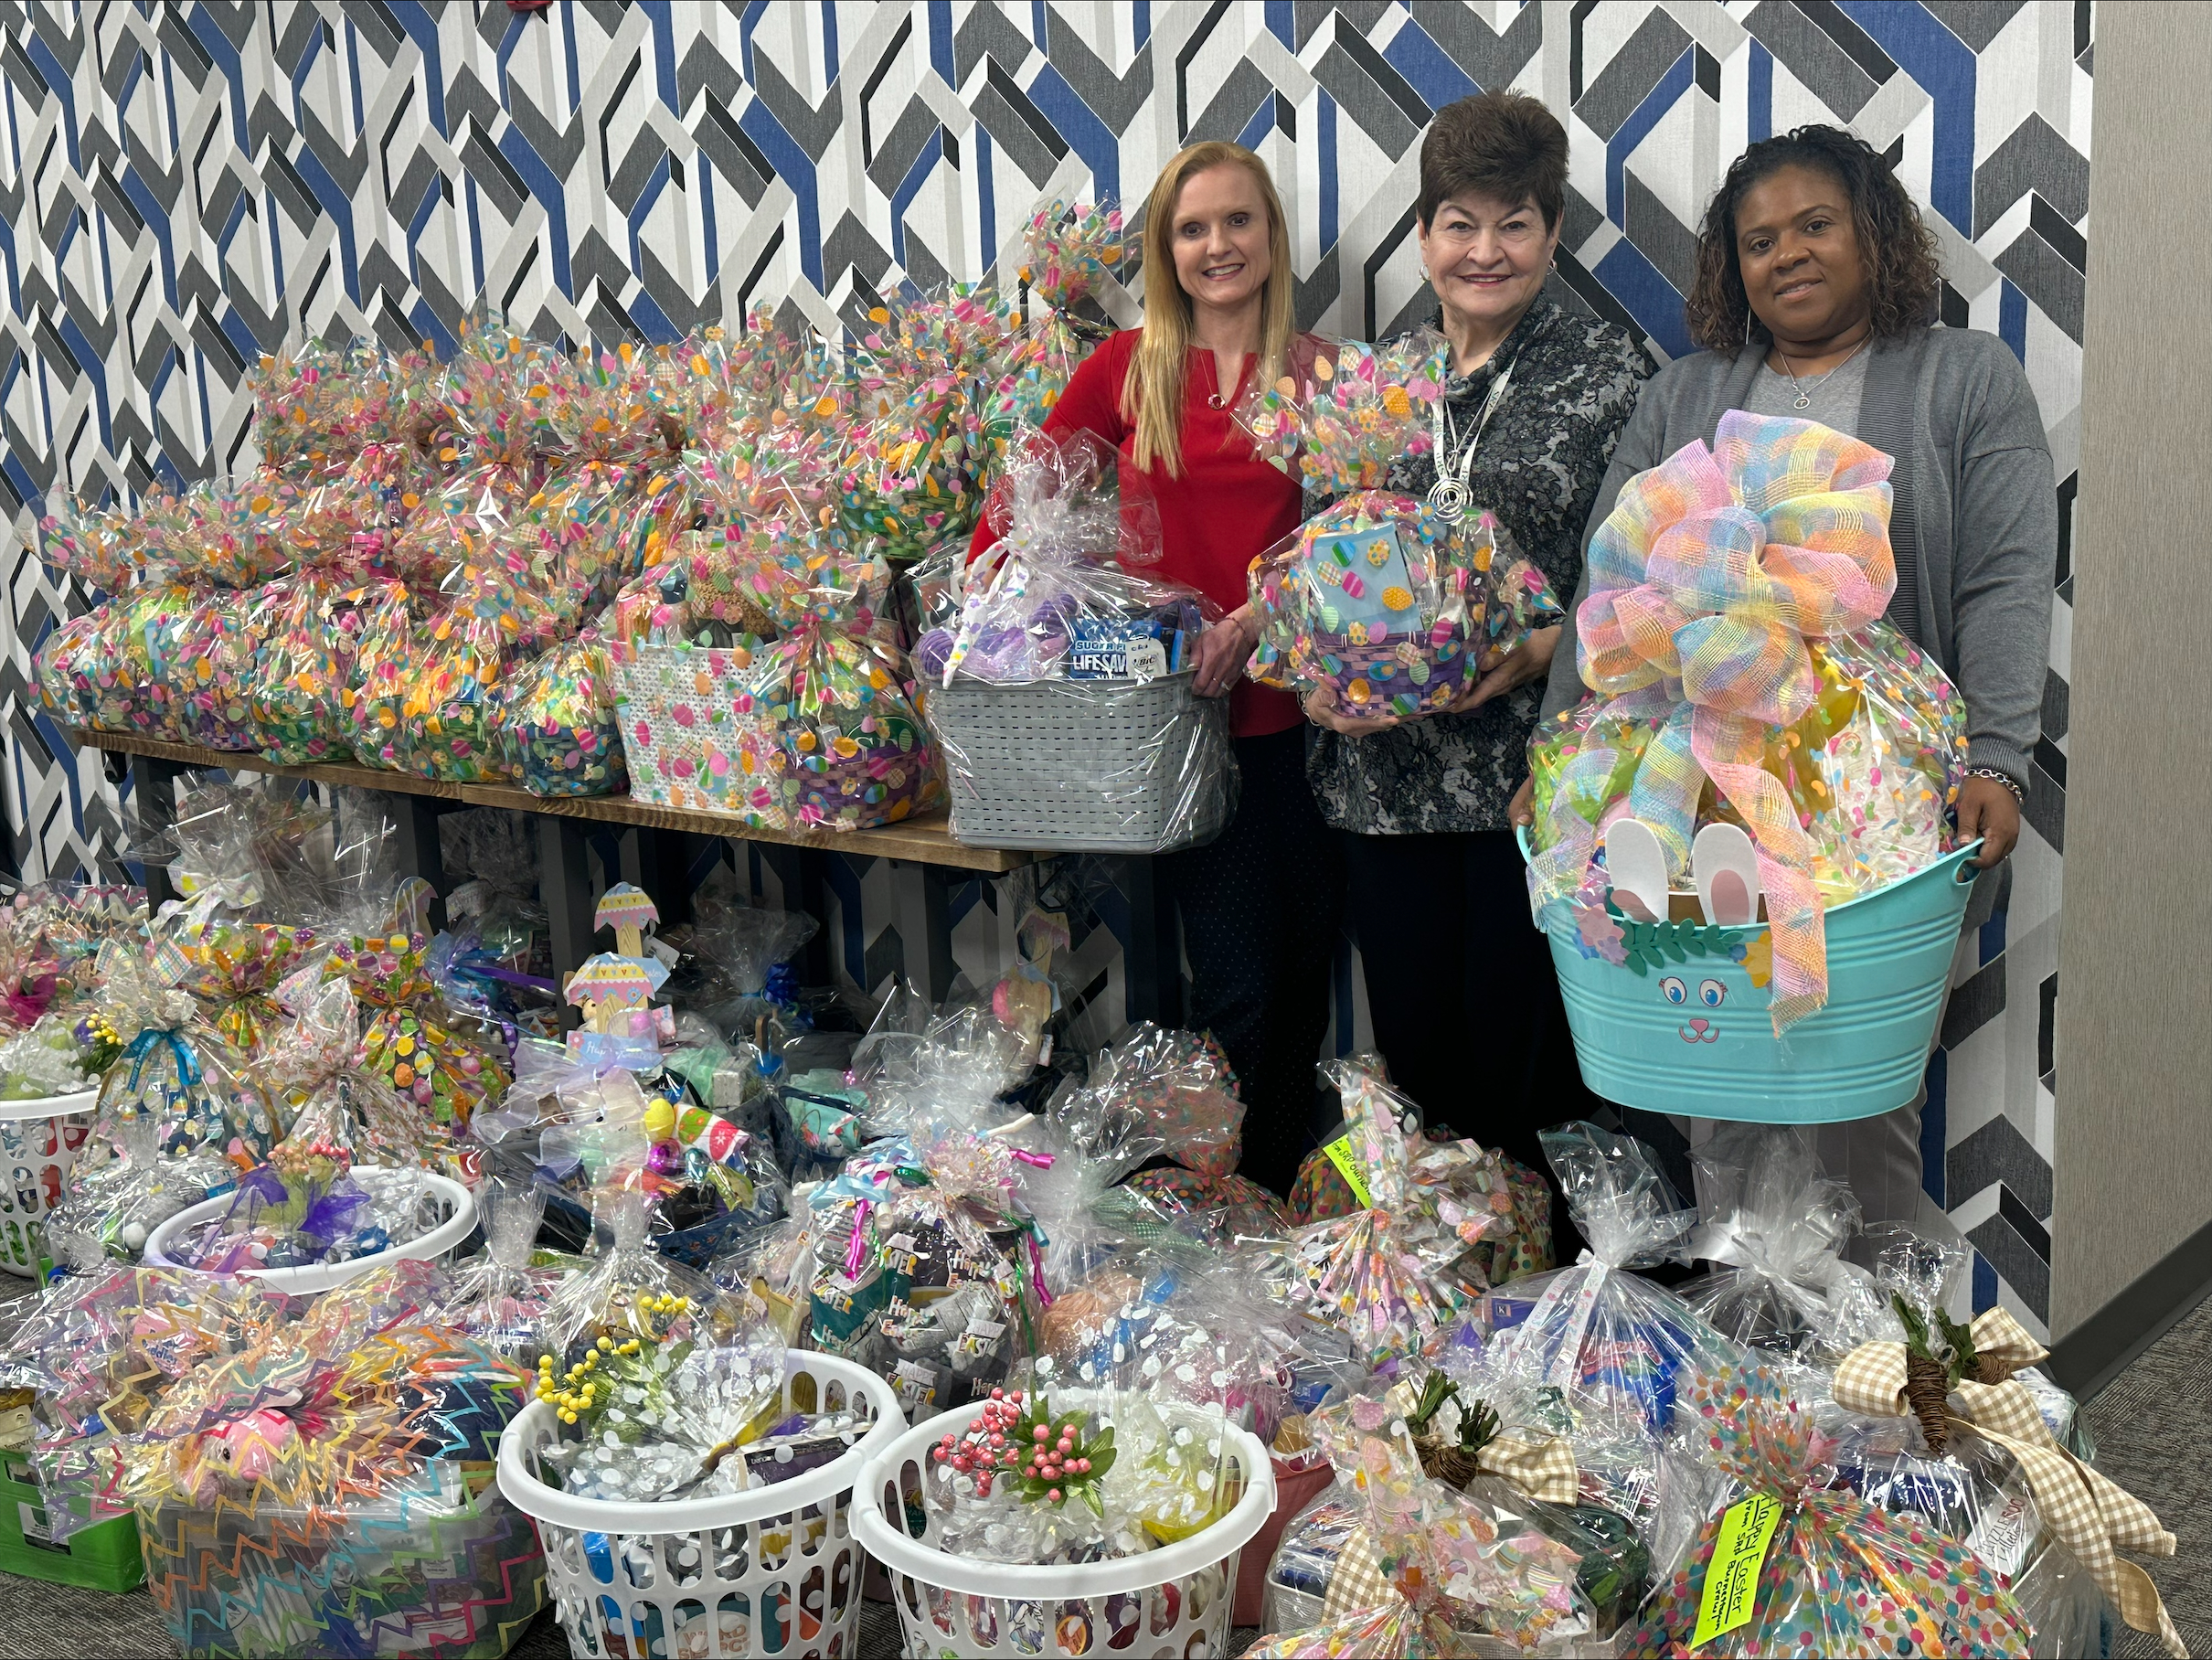 SRP FCU Staff Collect 81 Baskets for United Way Be-A-Bunny Program